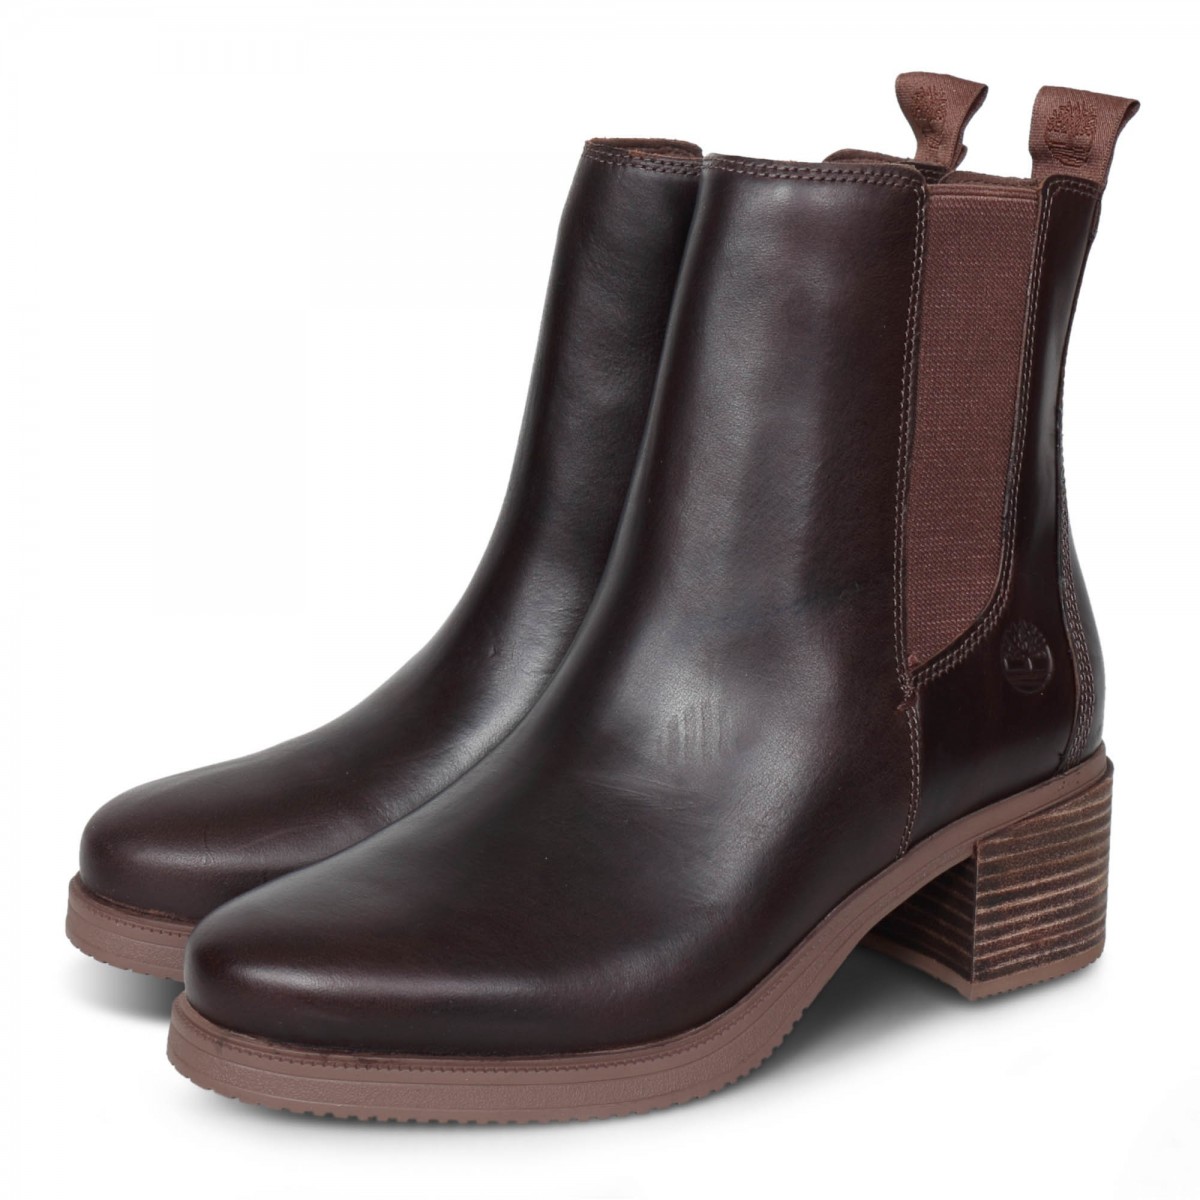 Timberland Dalston Vibe Chelsea Boot Chestnut 0A25B3201 Καφέ Καφέ